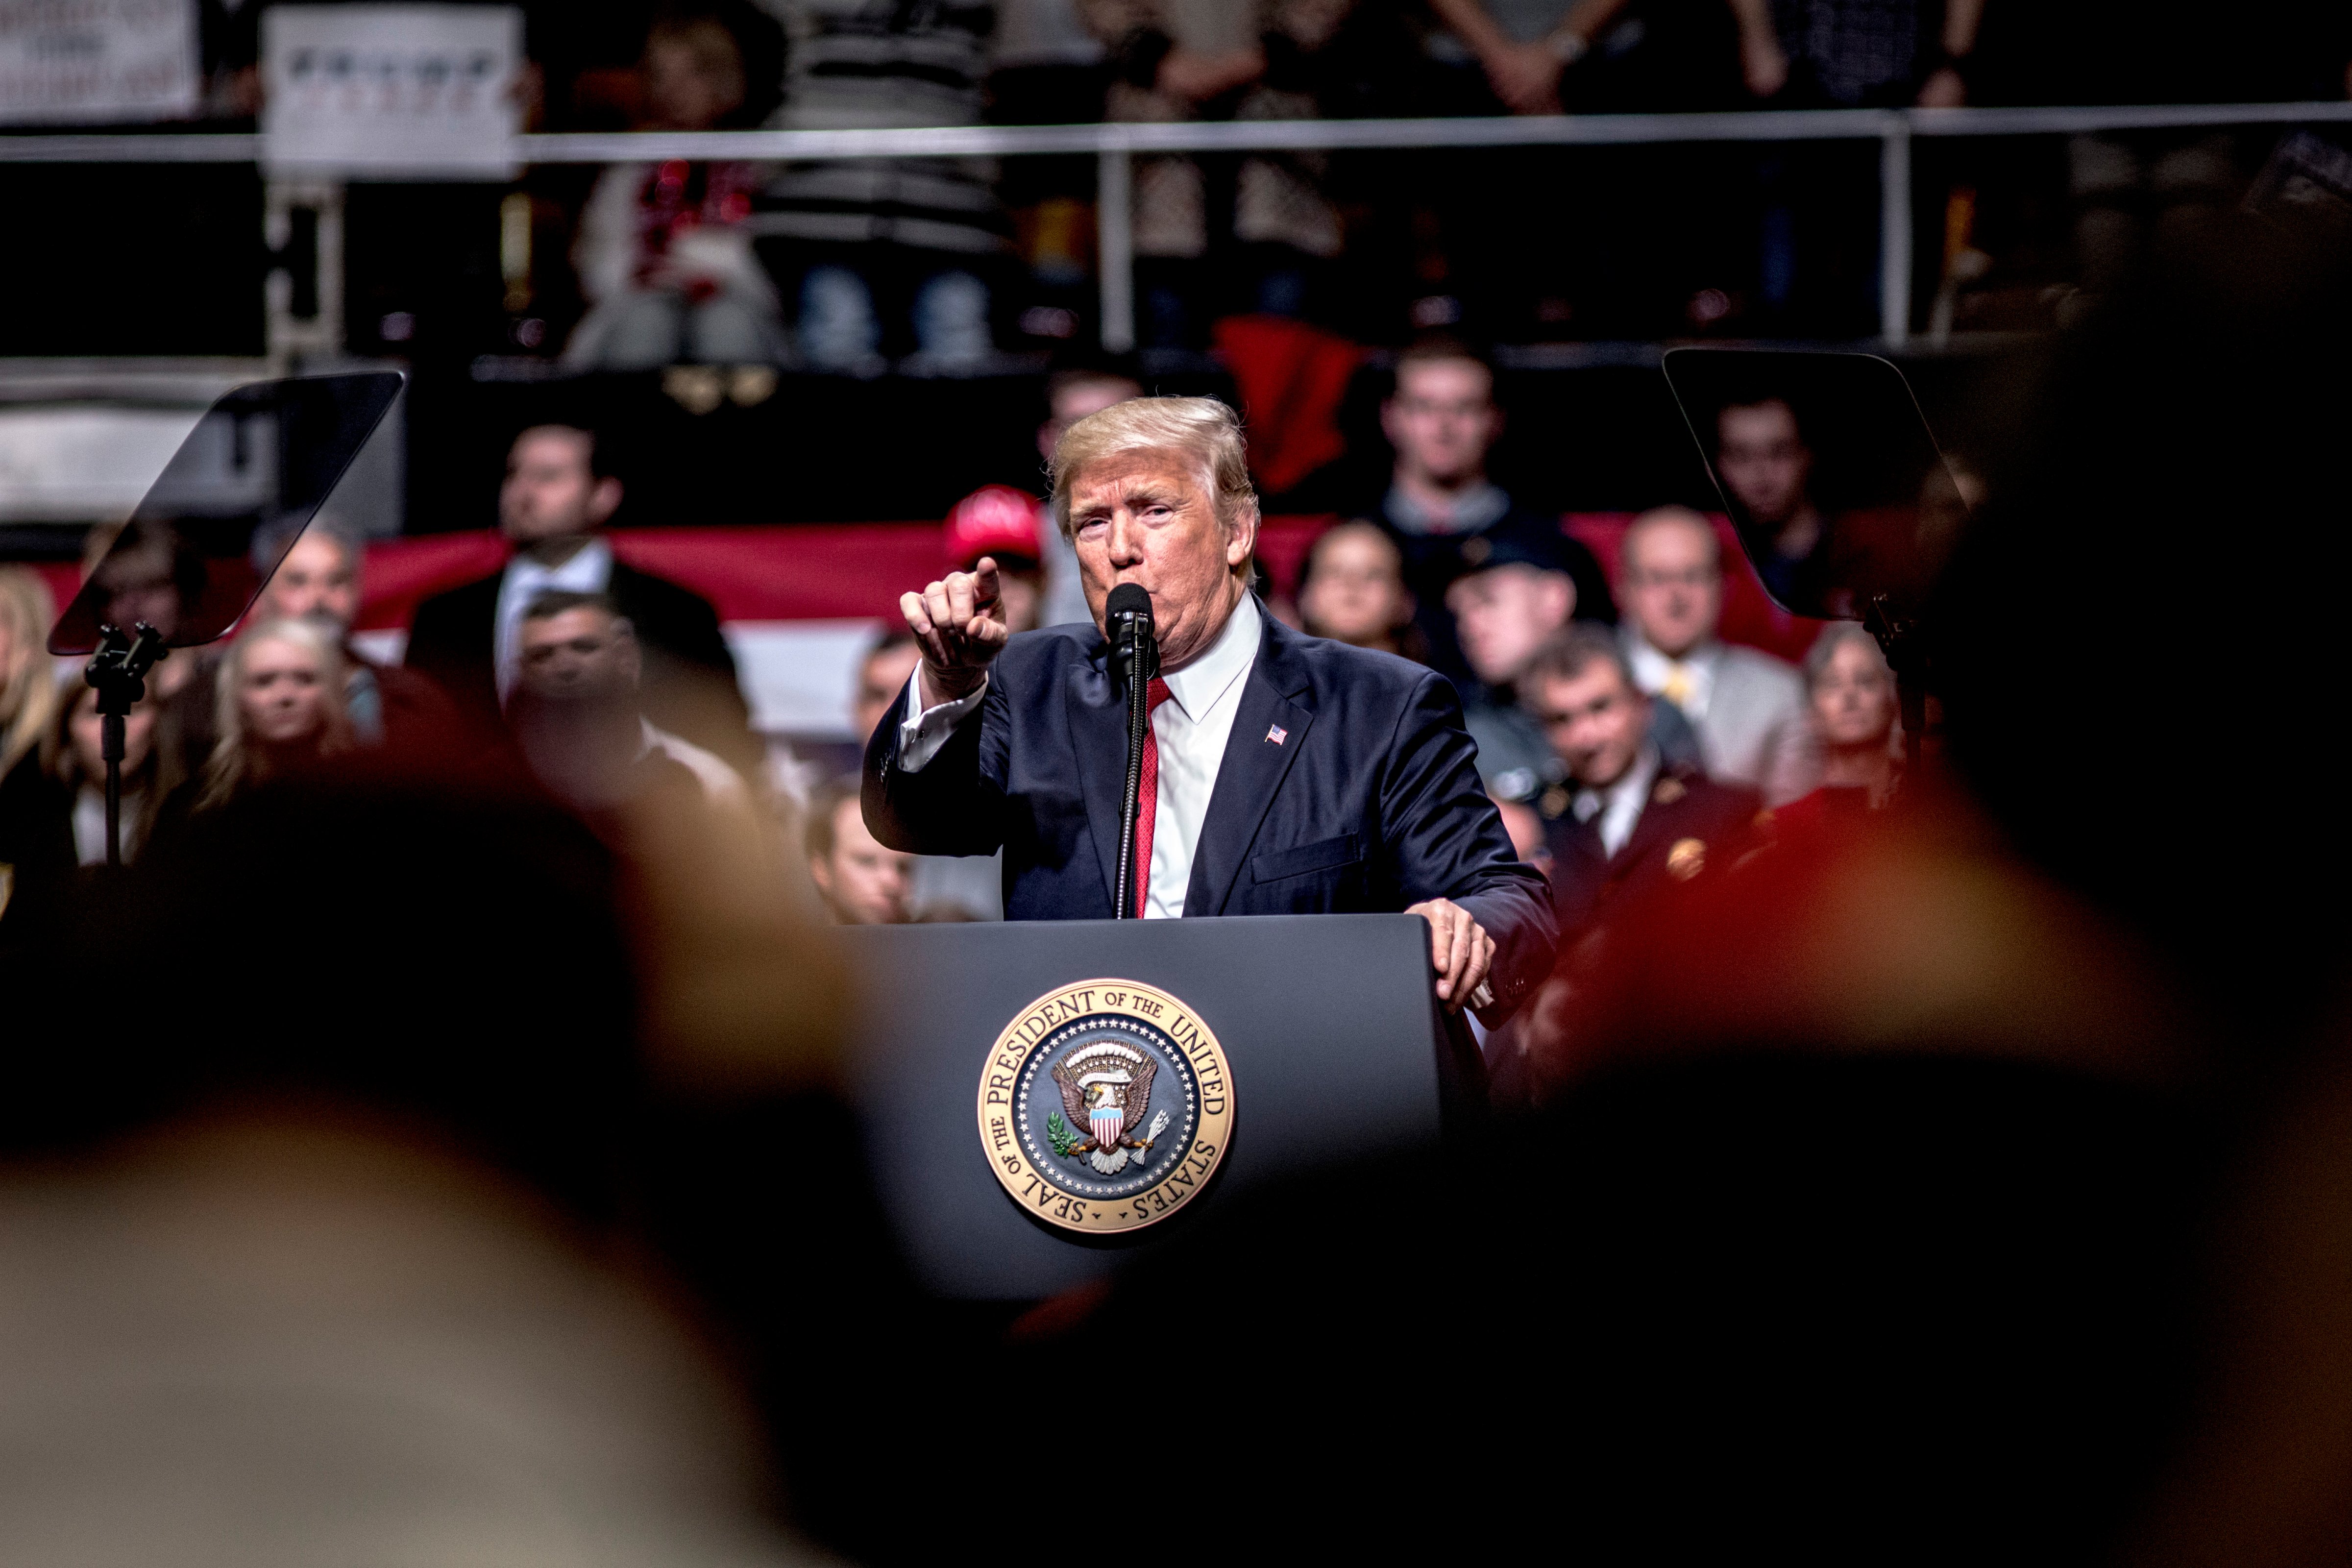 President Donald Trump speaks at a rally on March 15, 2017 in Nashville, Tennessee. (Andrea Morales/Getty Images)